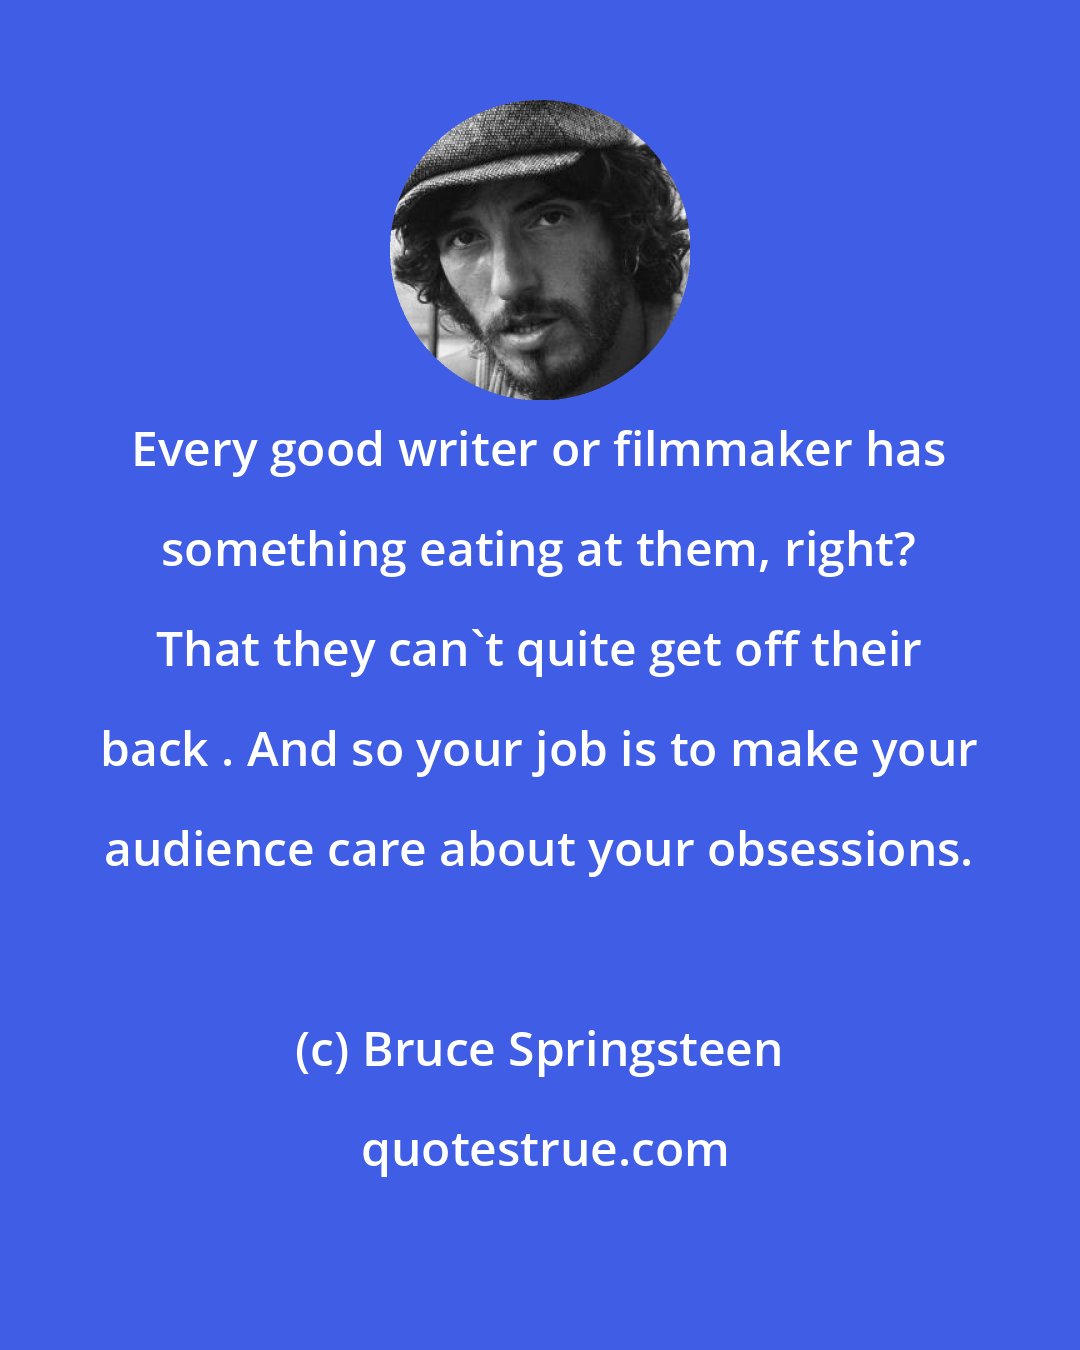 Bruce Springsteen: Every good writer or filmmaker has something eating at them, right? That they can't quite get off their back . And so your job is to make your audience care about your obsessions.